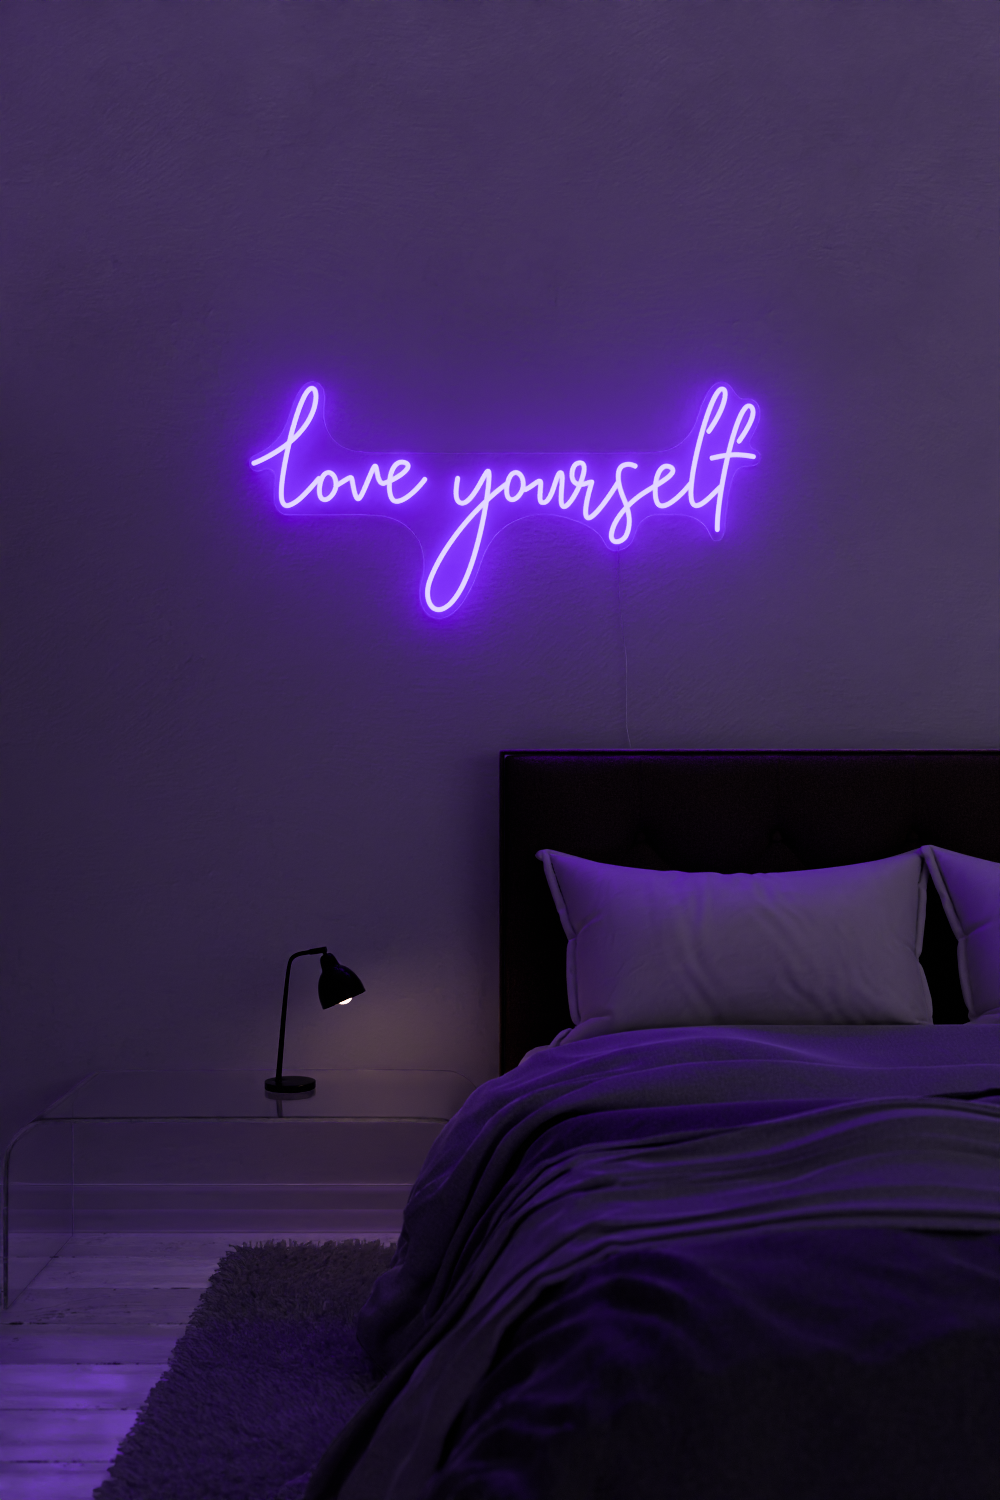 A purple neon sign that says "love yourself" in a bedroom